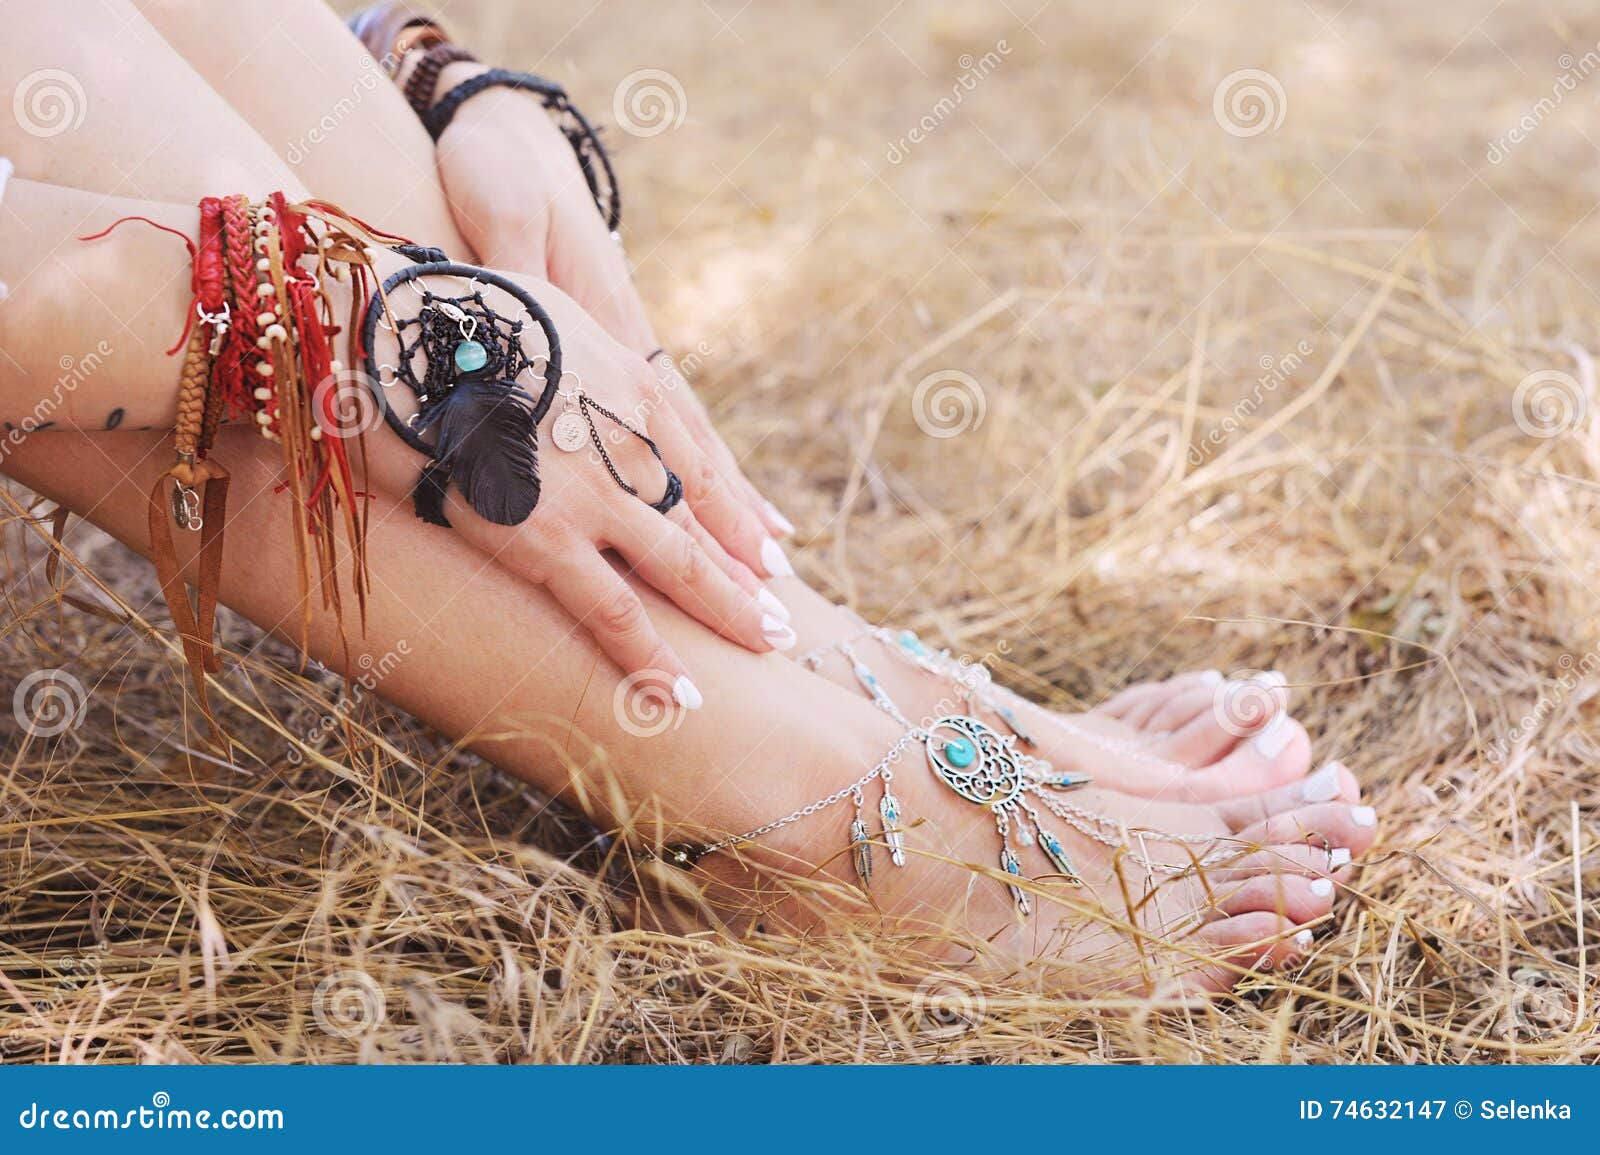 handcrafted bracelets on a woman legs and hands, dreamcatcher jewelry